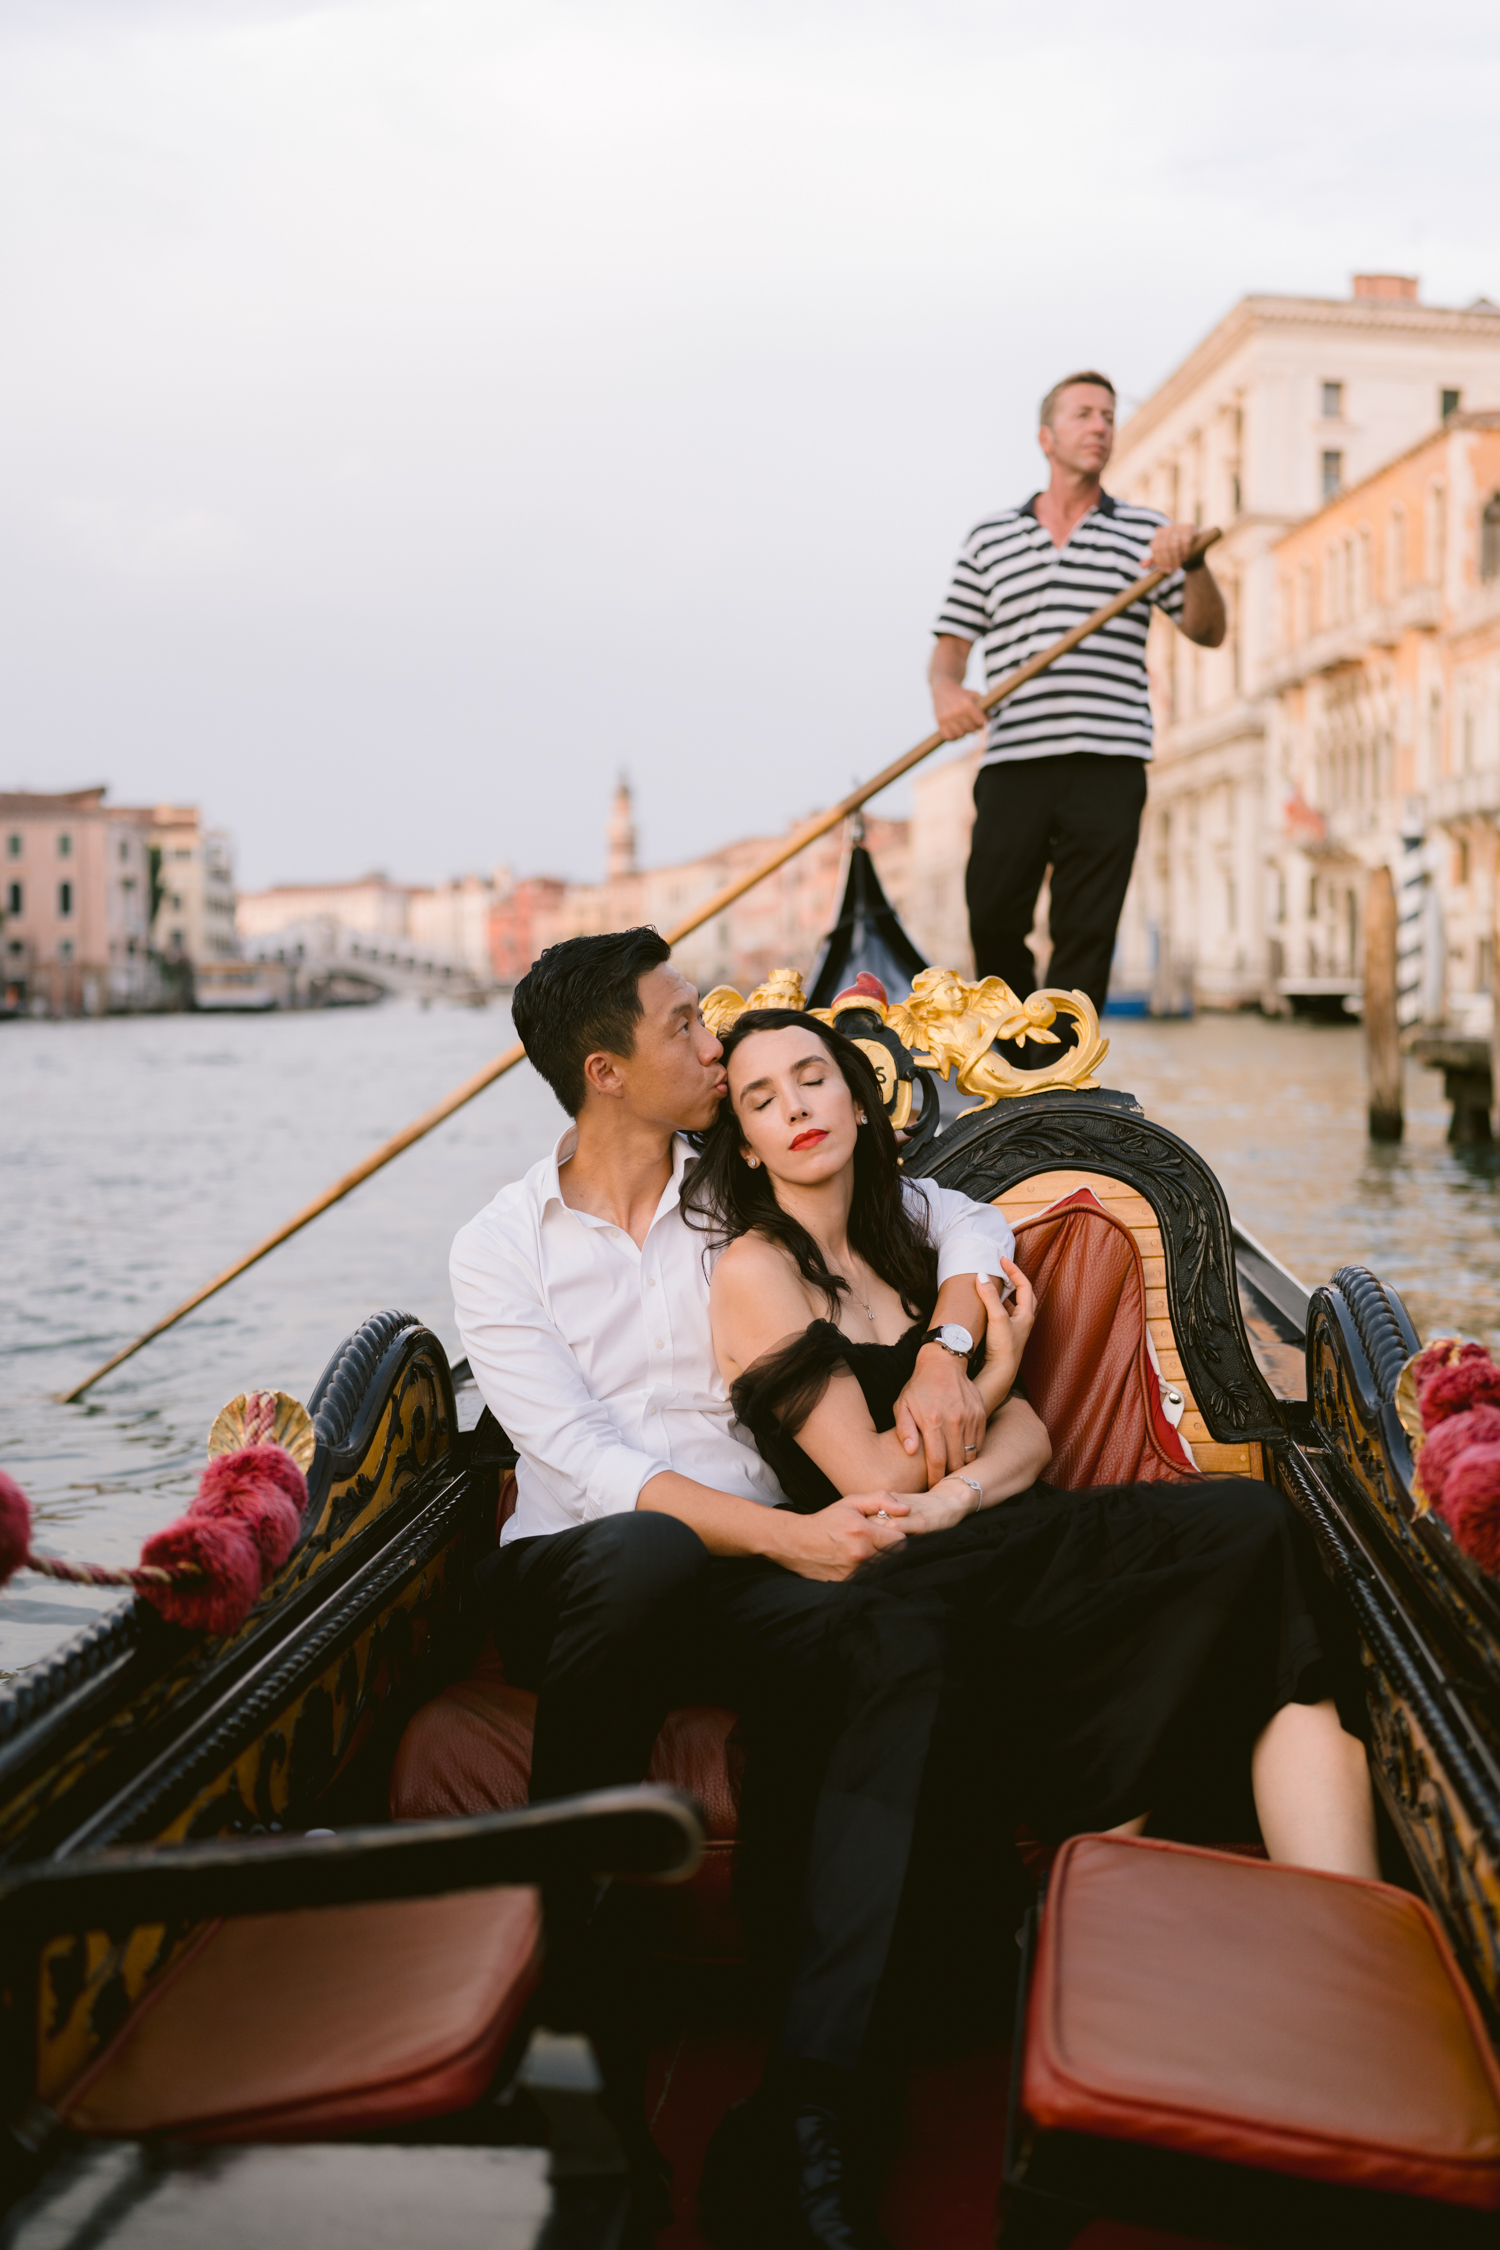 Book the best photographer in Venice for a sunset photoshoot